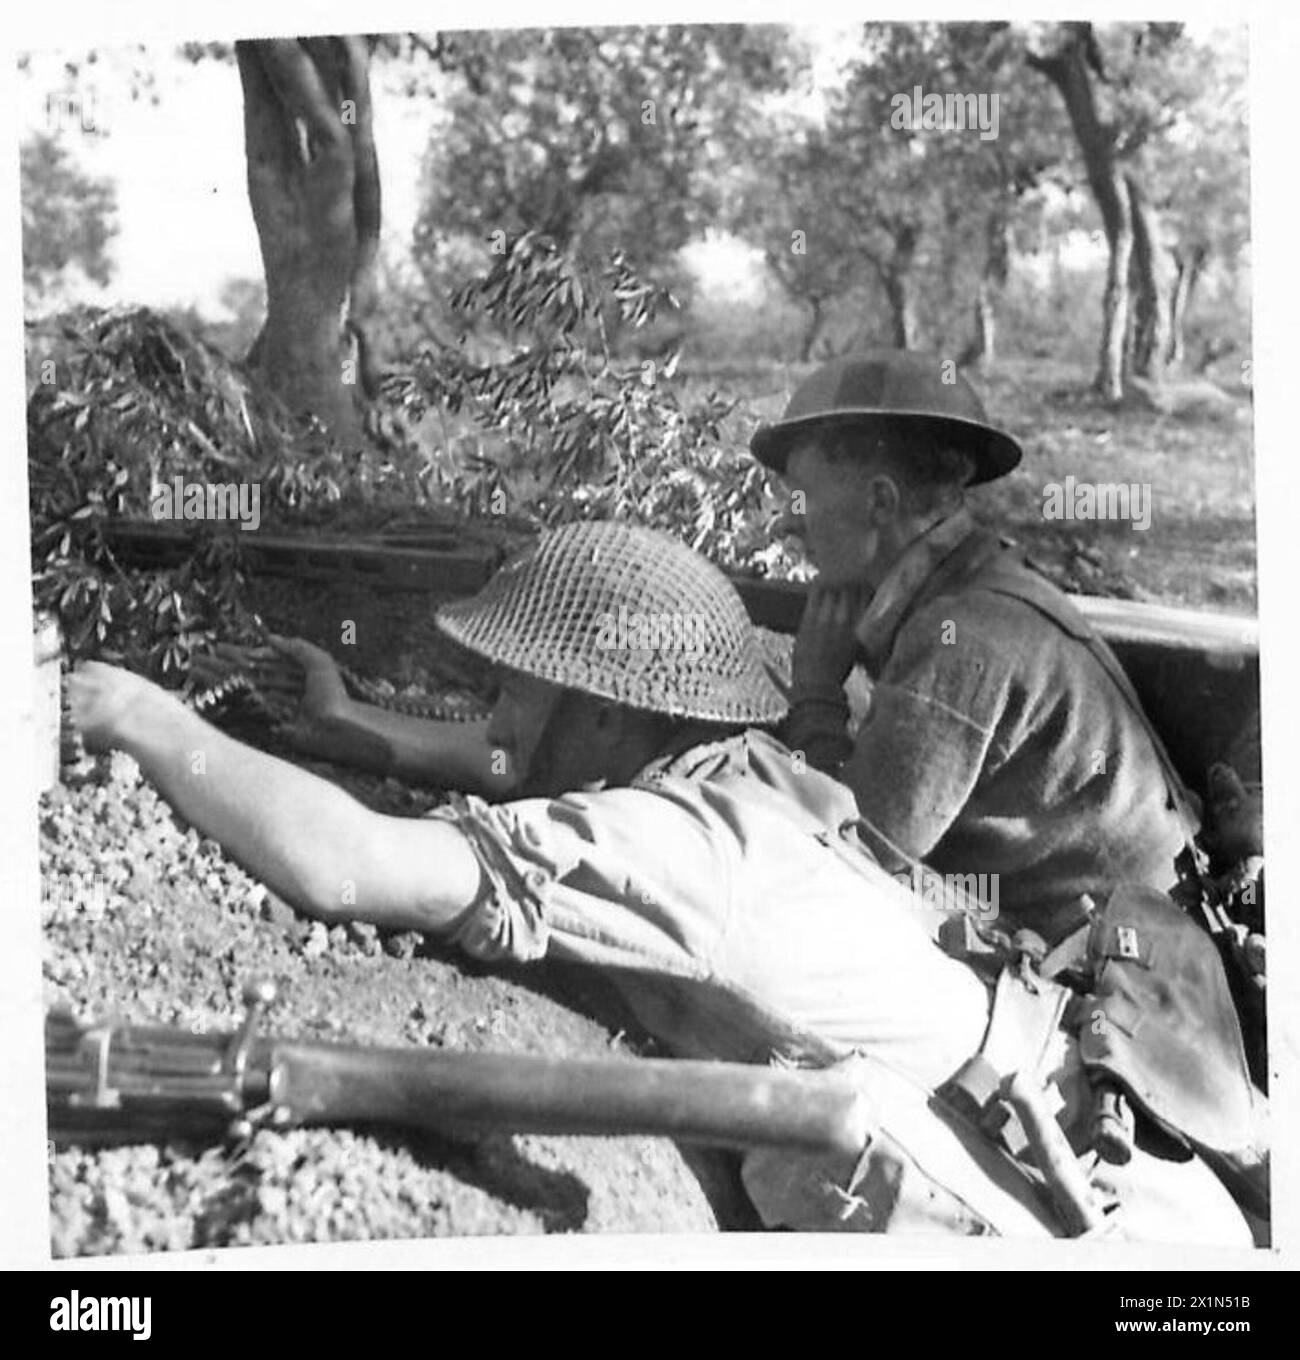 ITALY : EIGHTH ARMY FRONT - Rfn. J. Furnell of Southampton, the smallest and youngest man in the 2 L.I.R. and incidentally the battalion mascot, with Rfn. Swift of Manchester, manning a machine gun built from the parts of five captured enemy guns - 'E' Coy, British Army Stock Photo